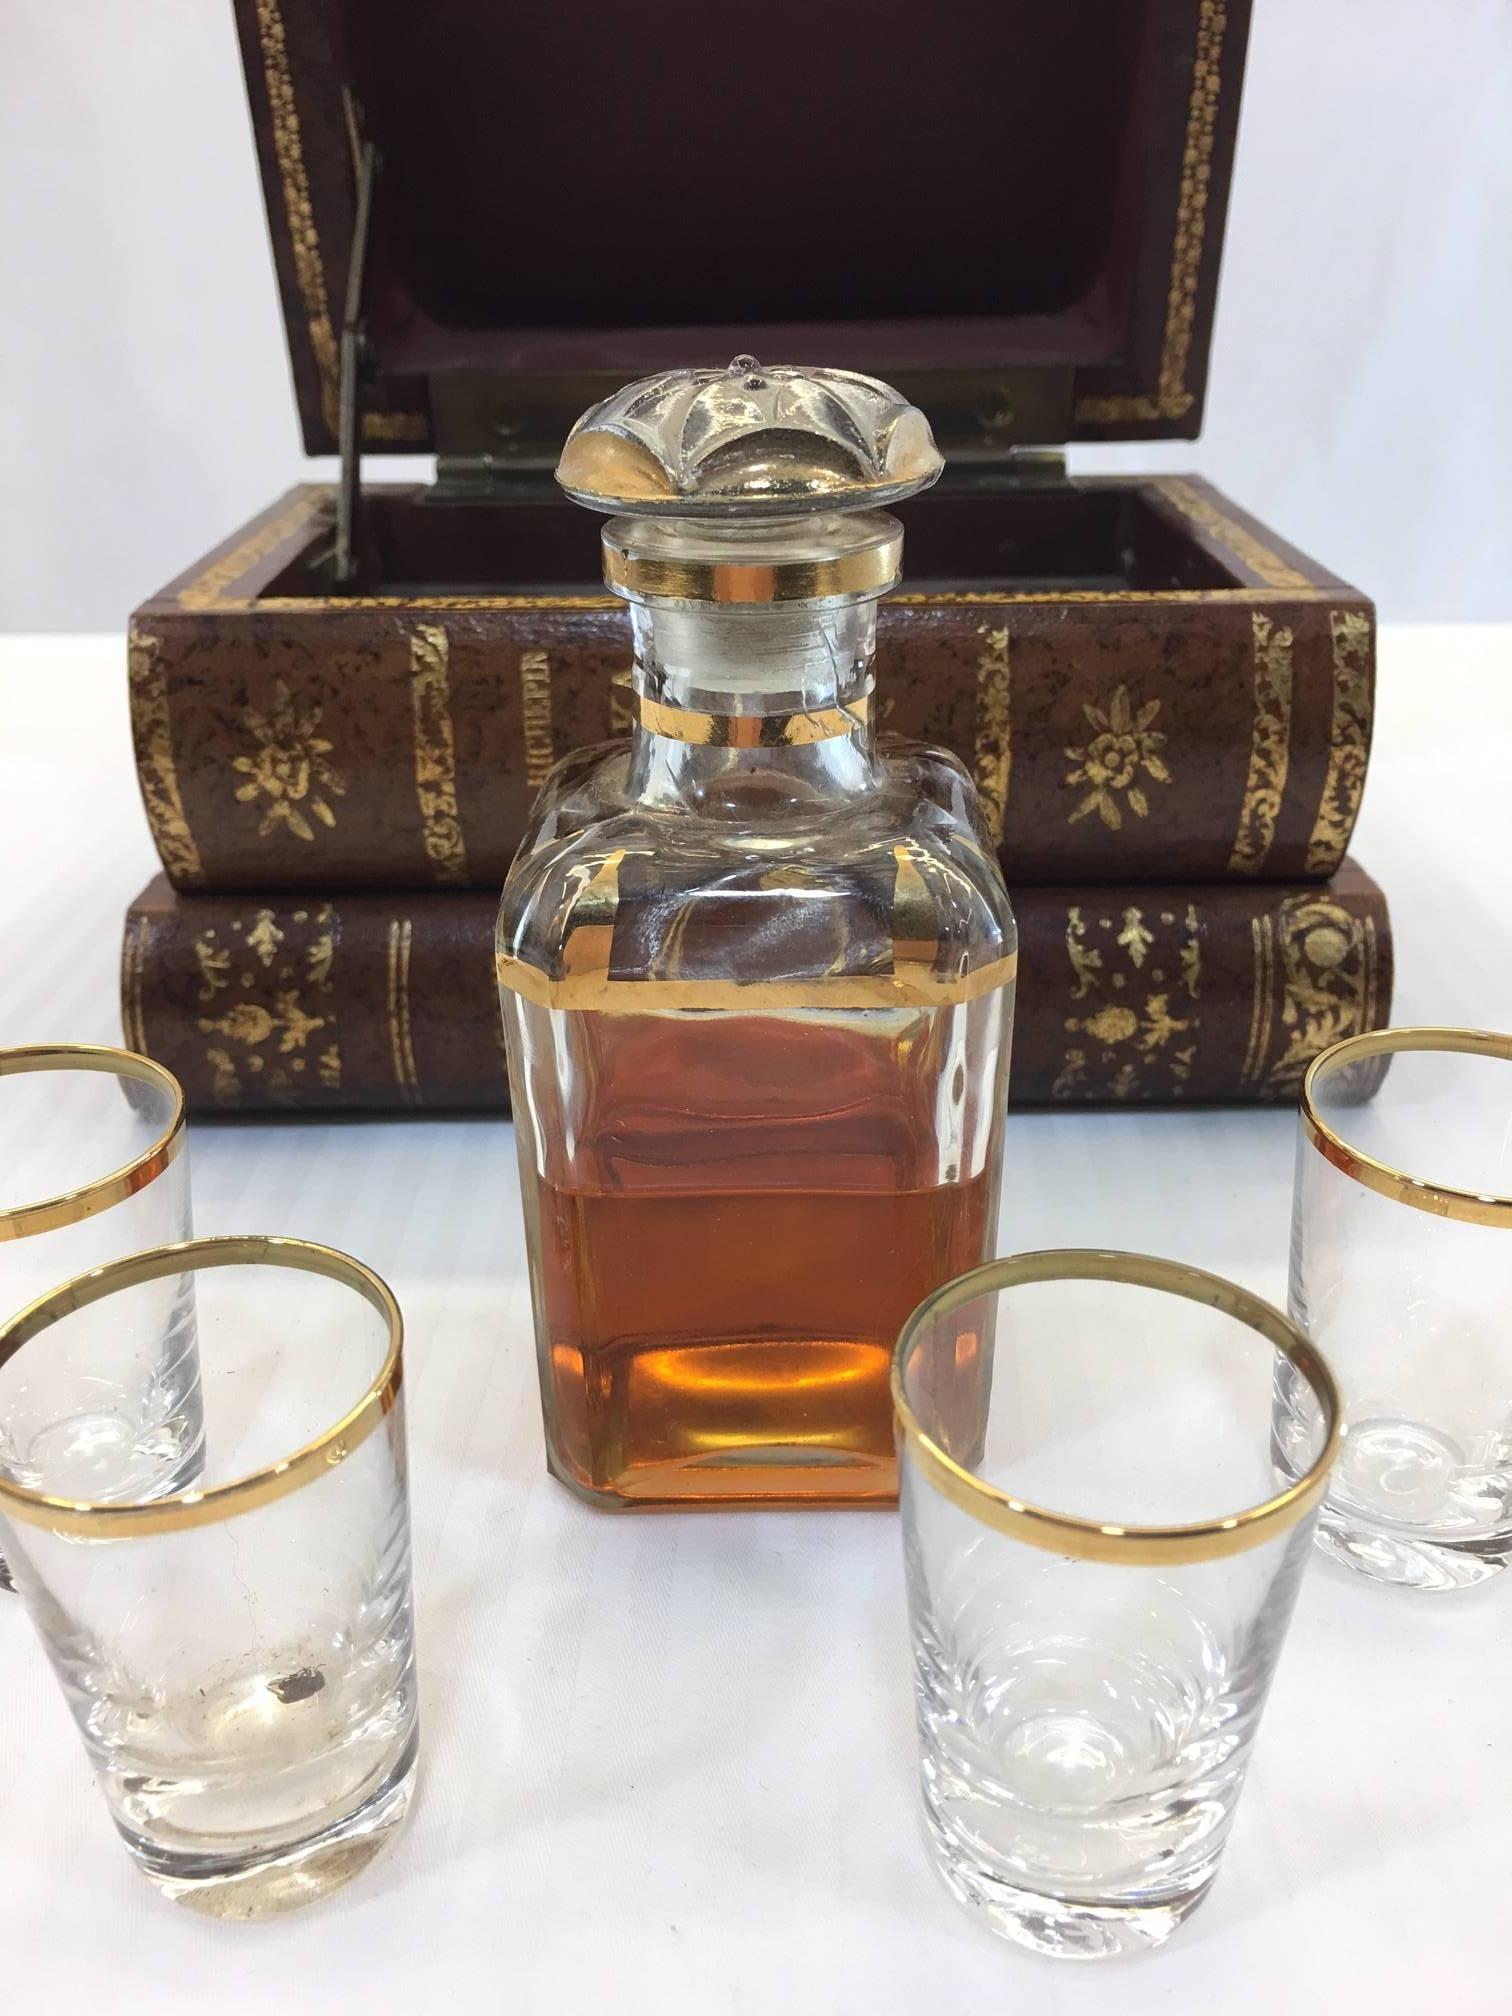 This set holds one decanter and four cordial glasses and even a bit of scotch from some prior life. The glasses and decanter are gold trimmed and fit neatly into the leather box with gilded markings, cleverly disguised as a stack of books. Brass